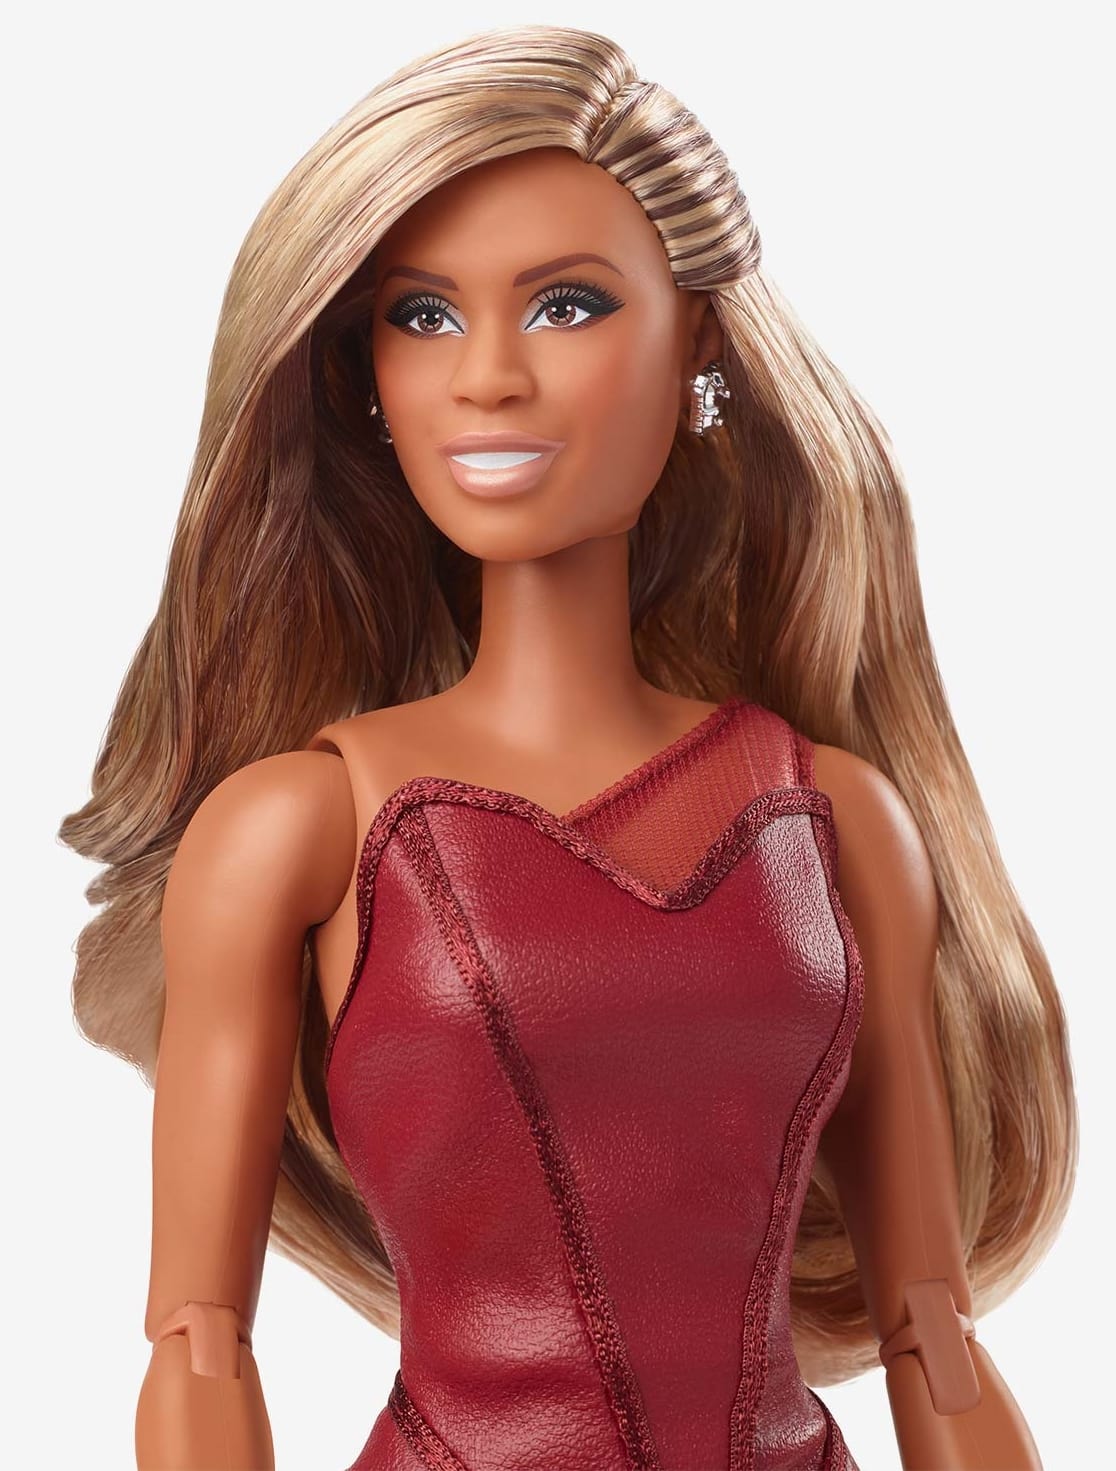 The Laverne Cox Barbie with her hair swept into glamorous Hollywood waves